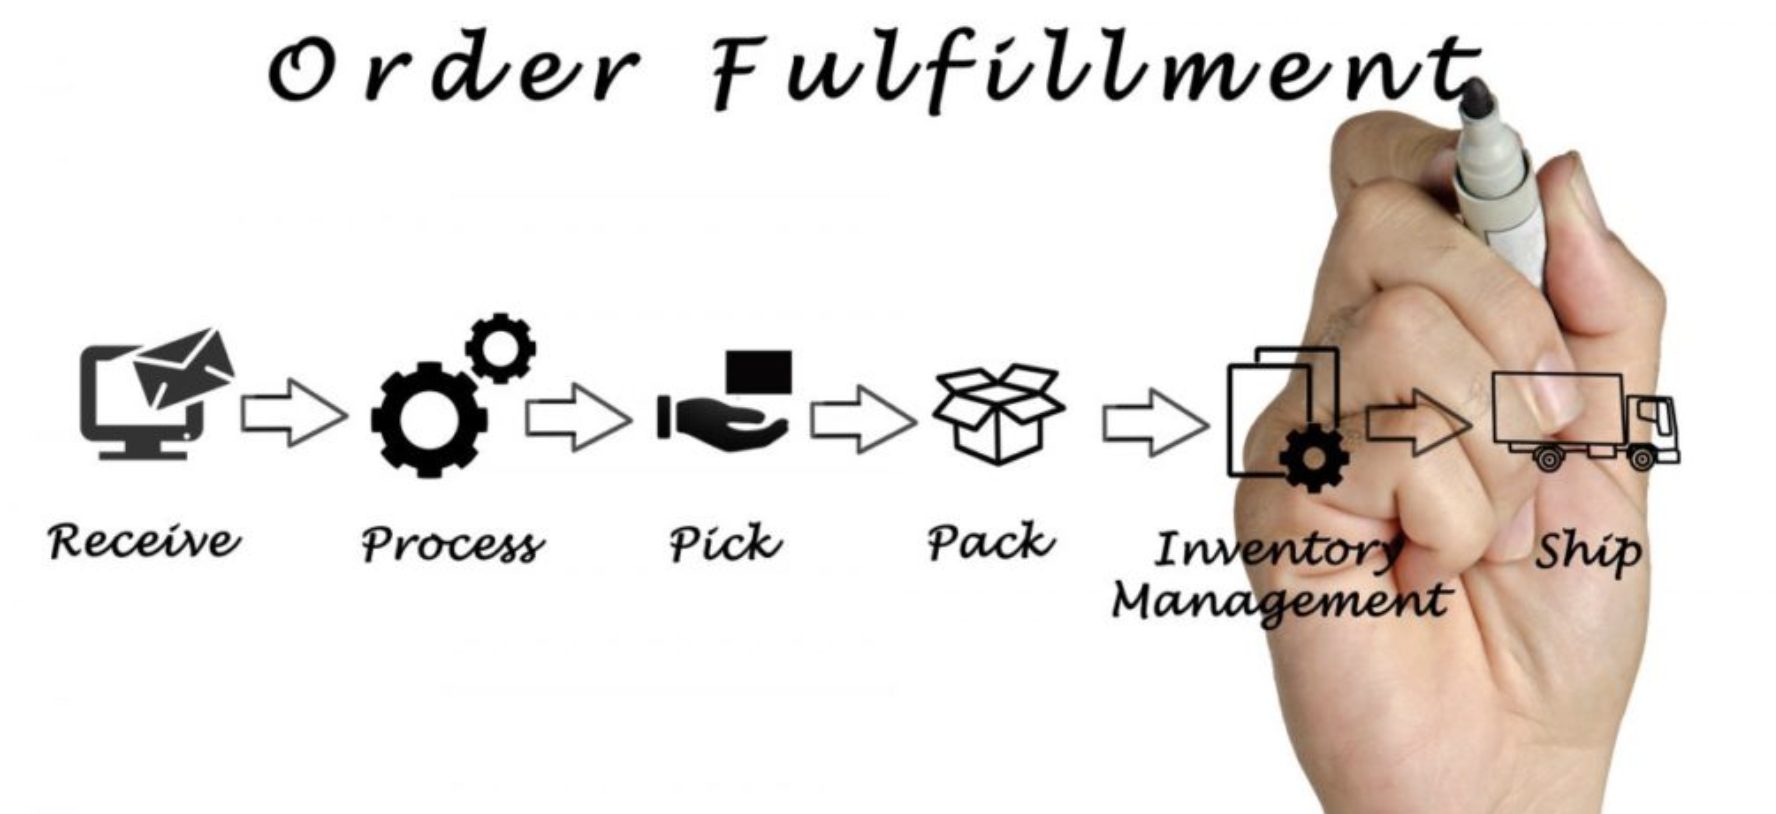 Order Fulfillment and Customer Service